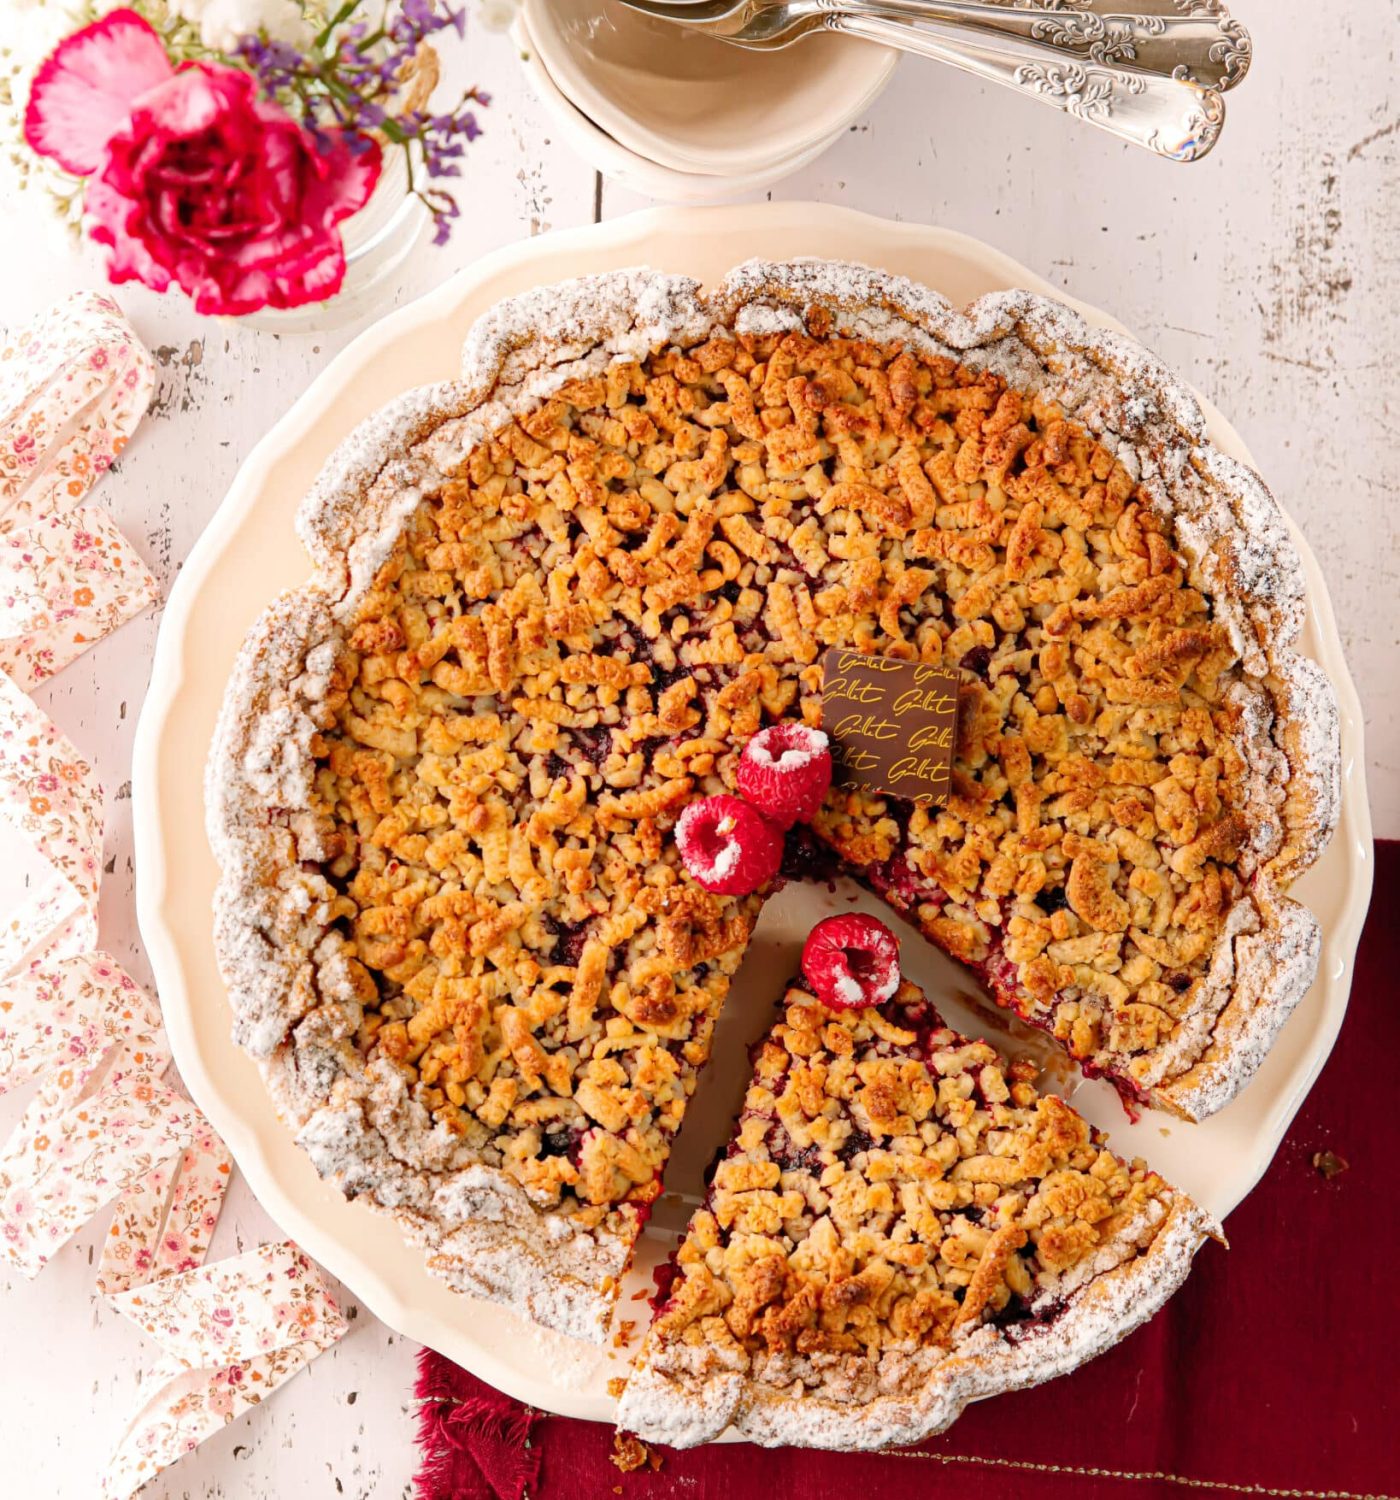 Tarte crumble fruits rouges - Gamme Hiver